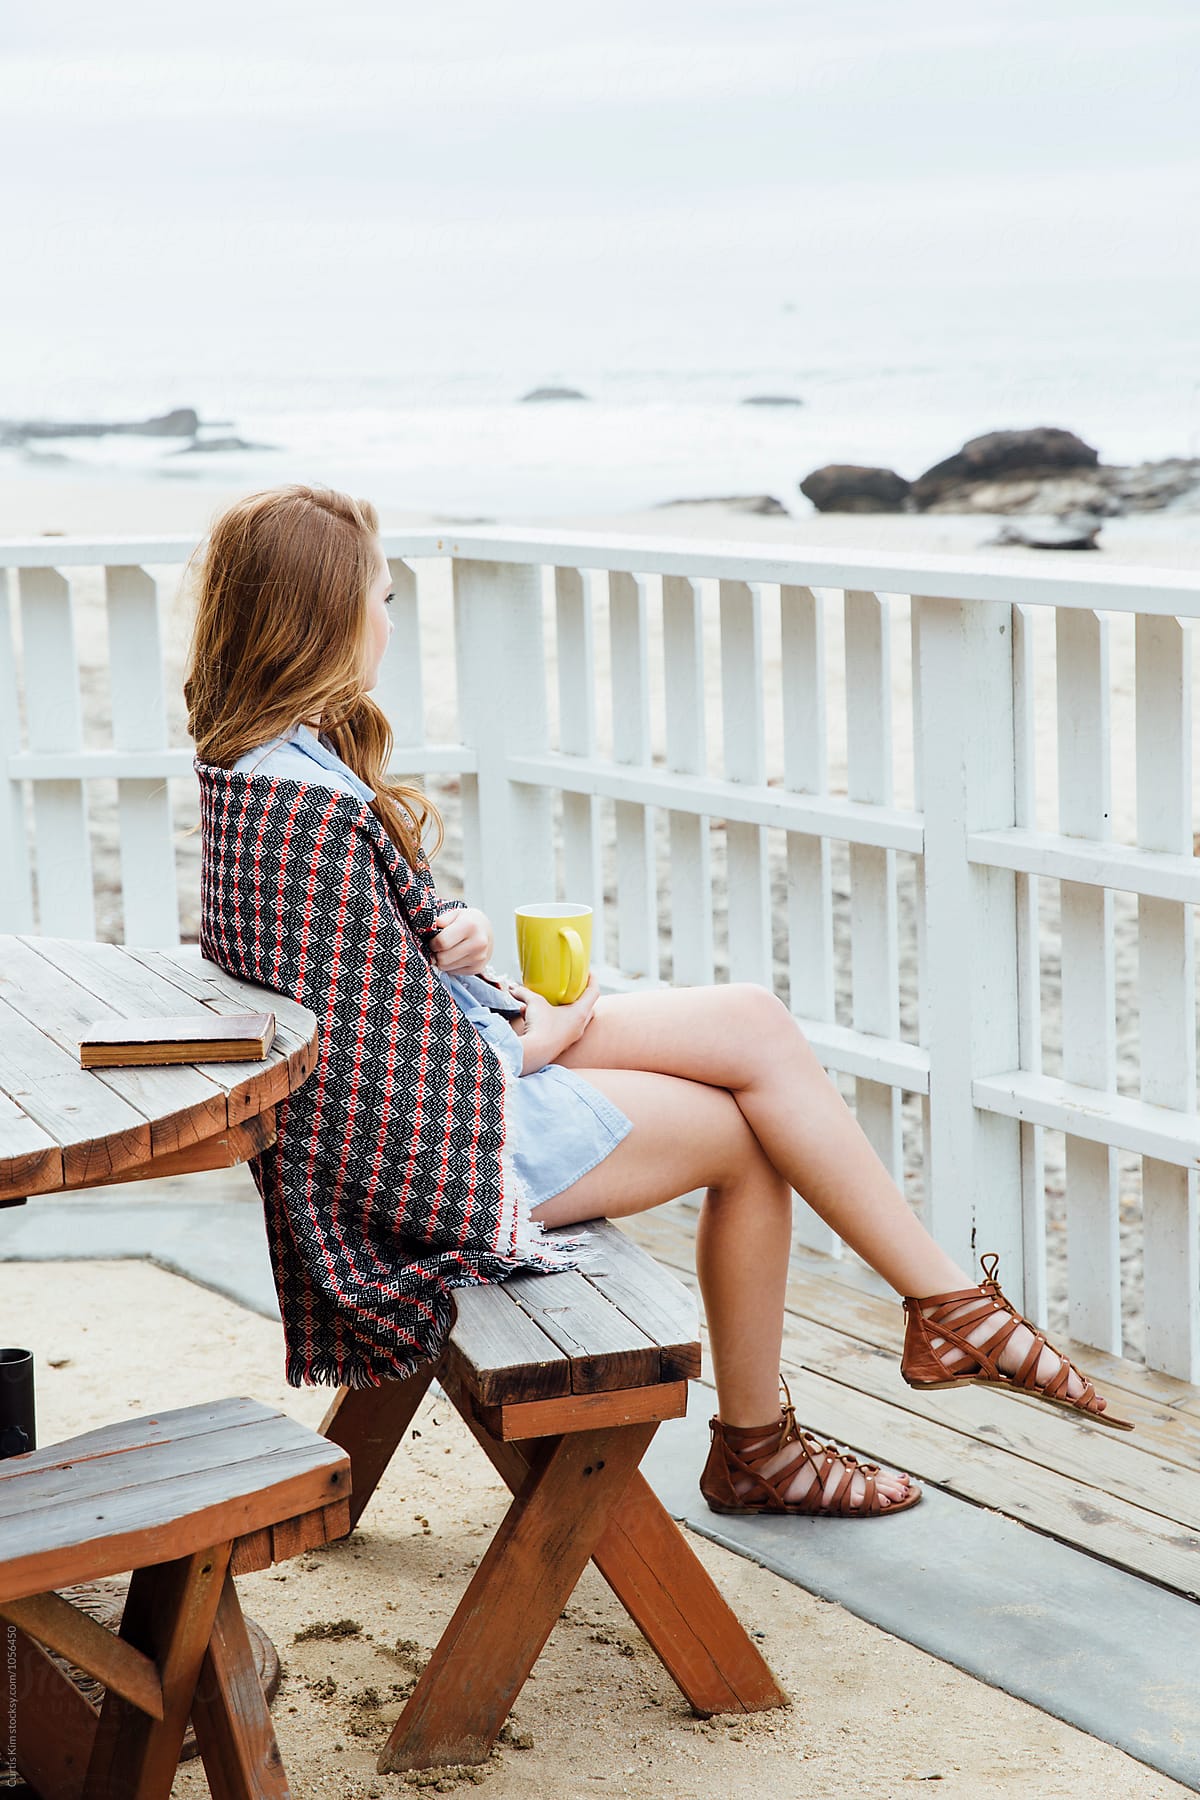 Woman Sitting On Bench Overlooking The Ocean By Stocksy Contributor